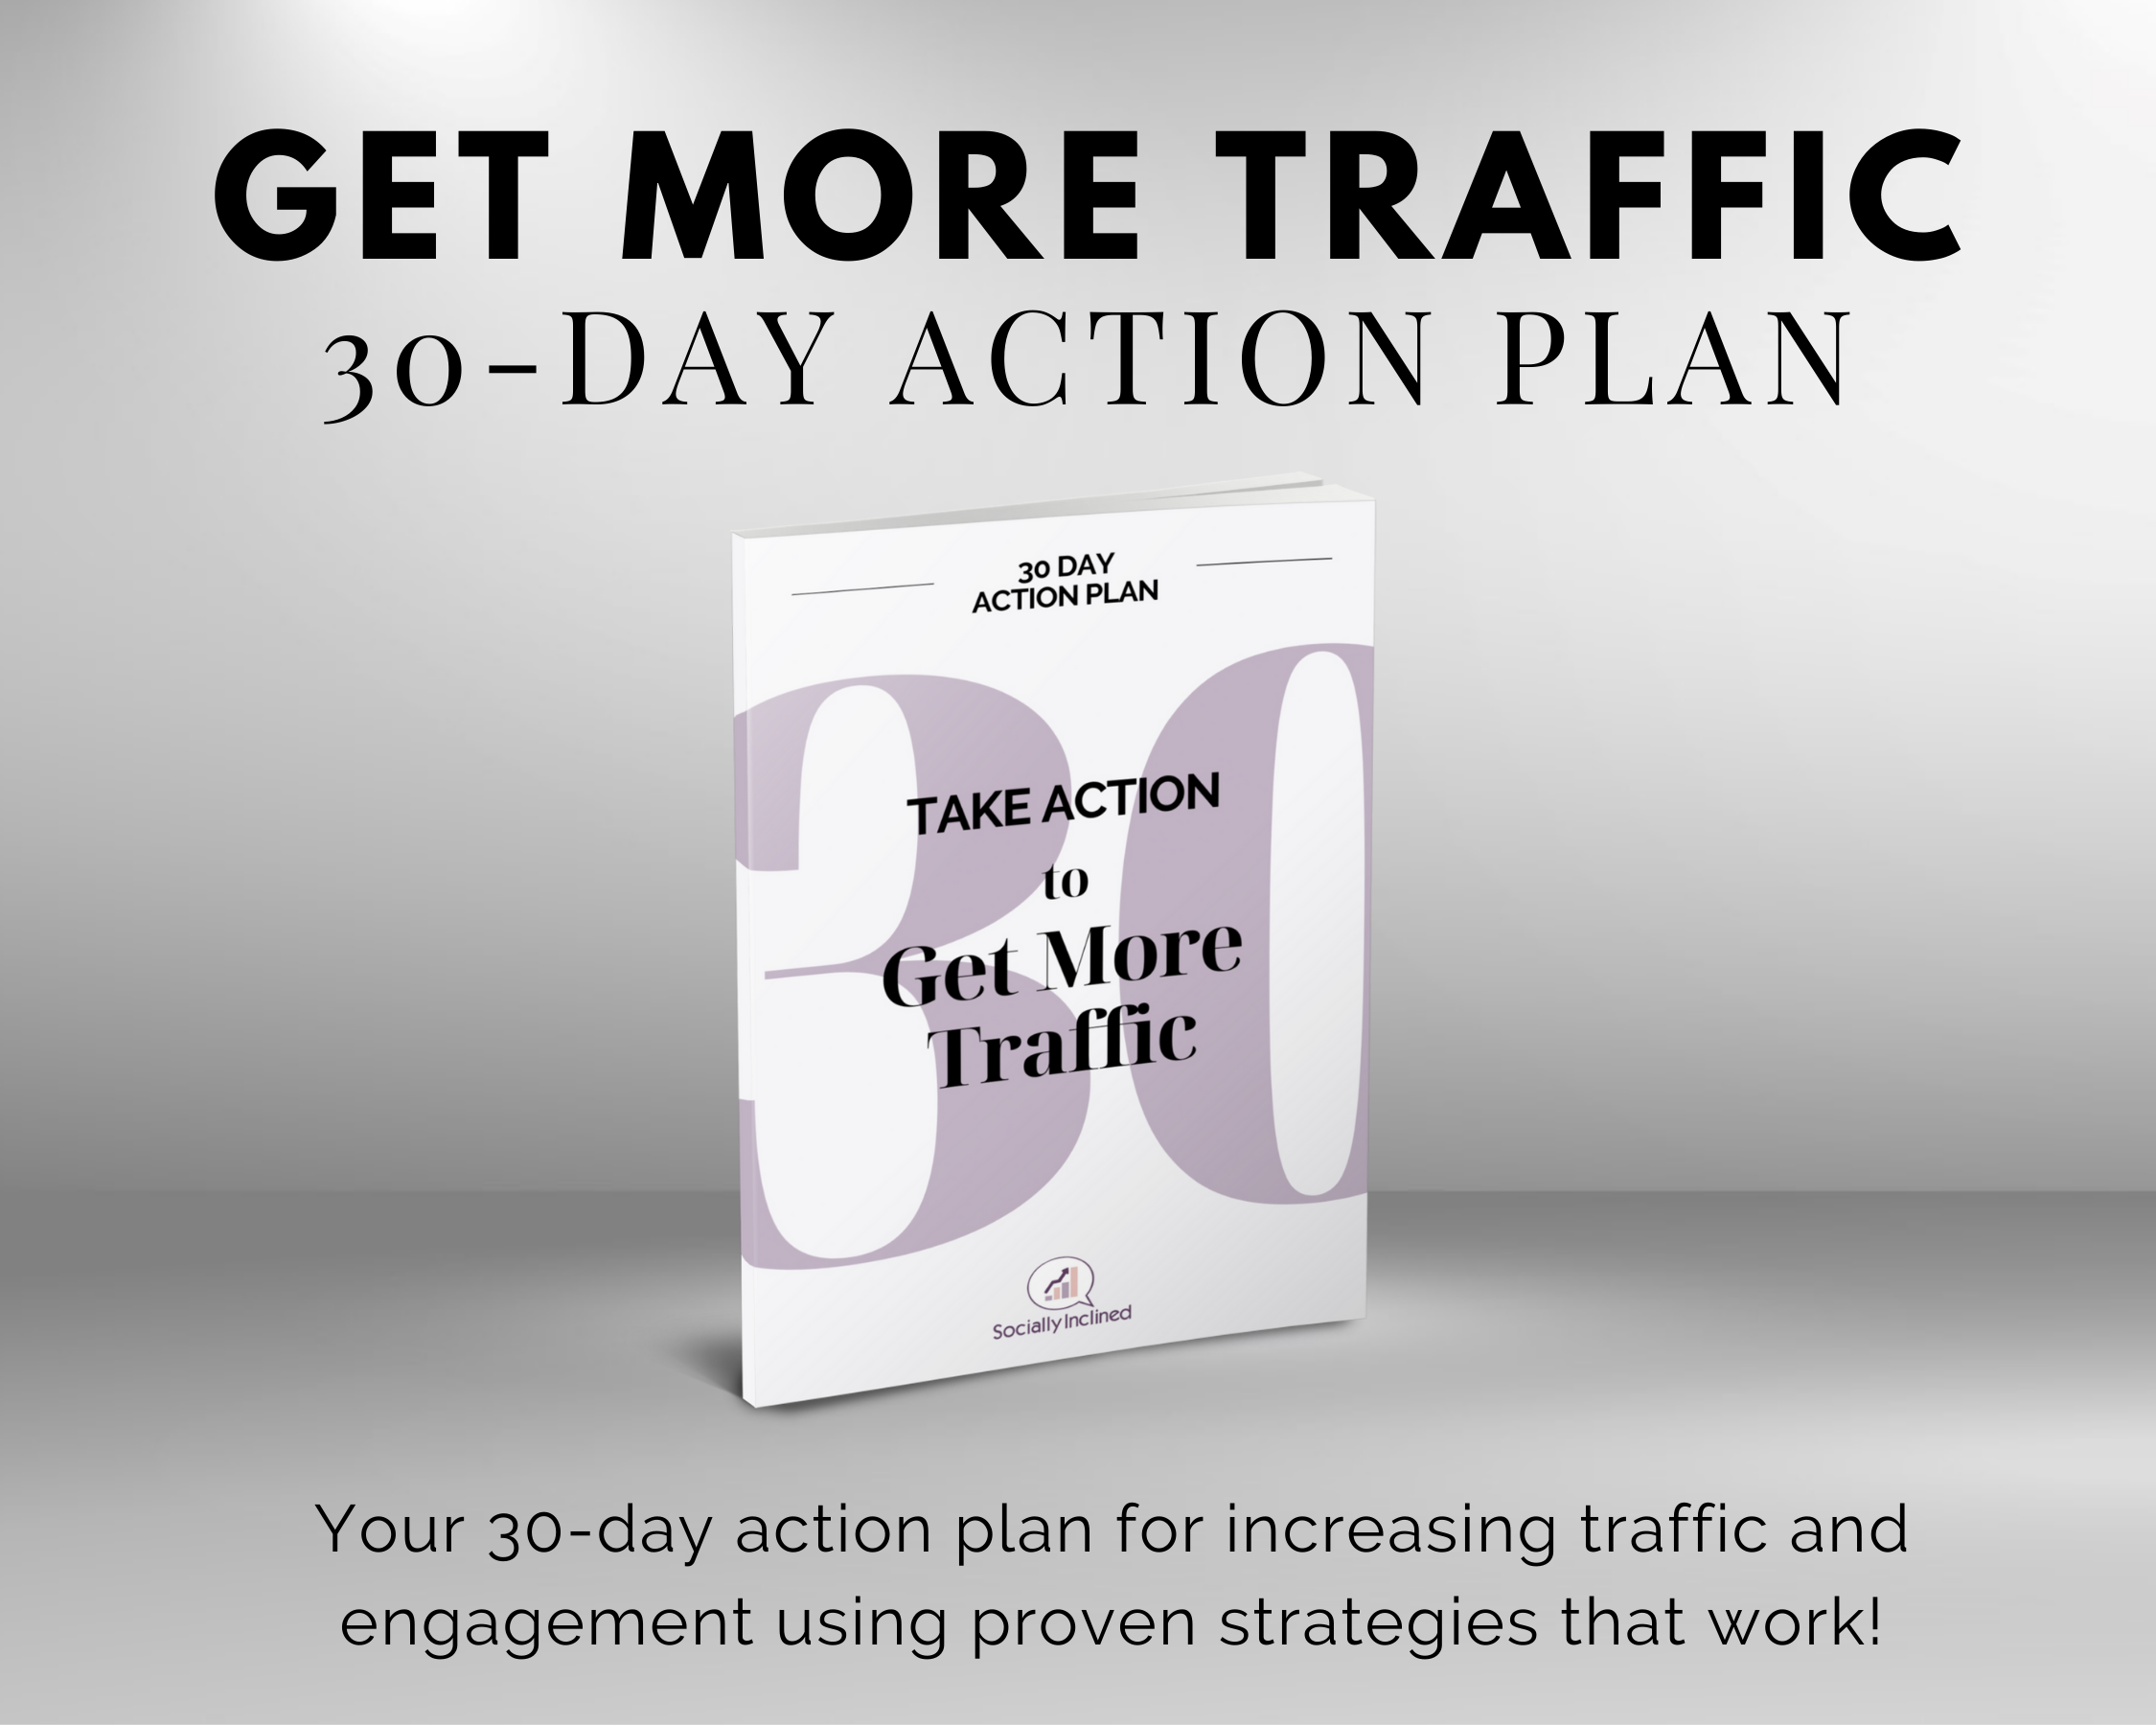 Accelerate small business growth with a comprehensive 30-day Get More Traffic SEO action plan from Get Socially Inclined.